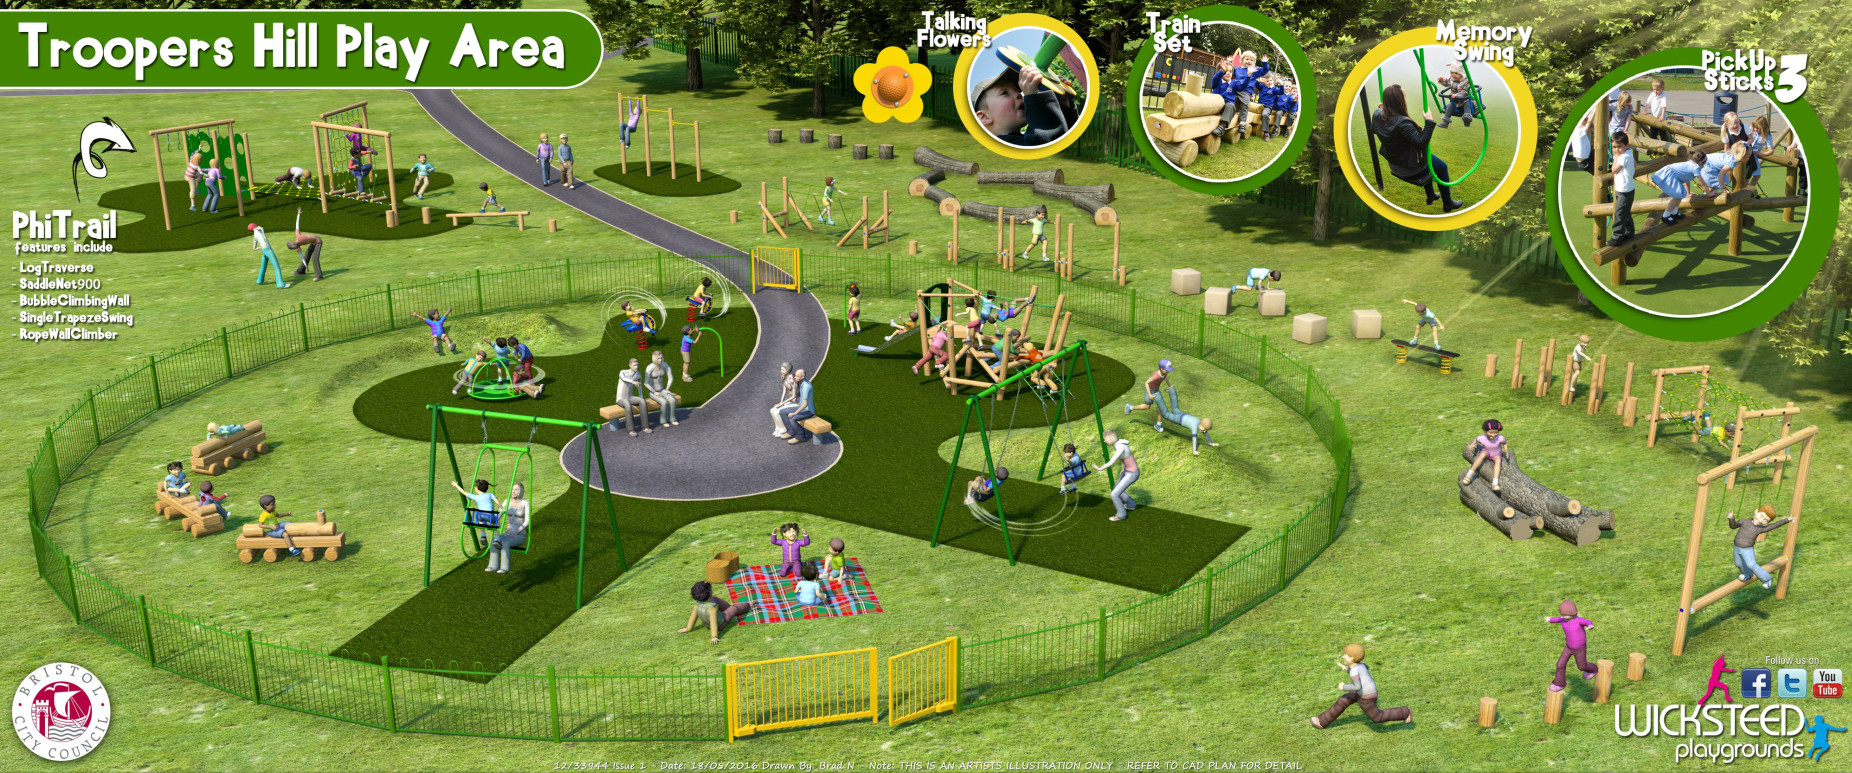 Proposed Play Area